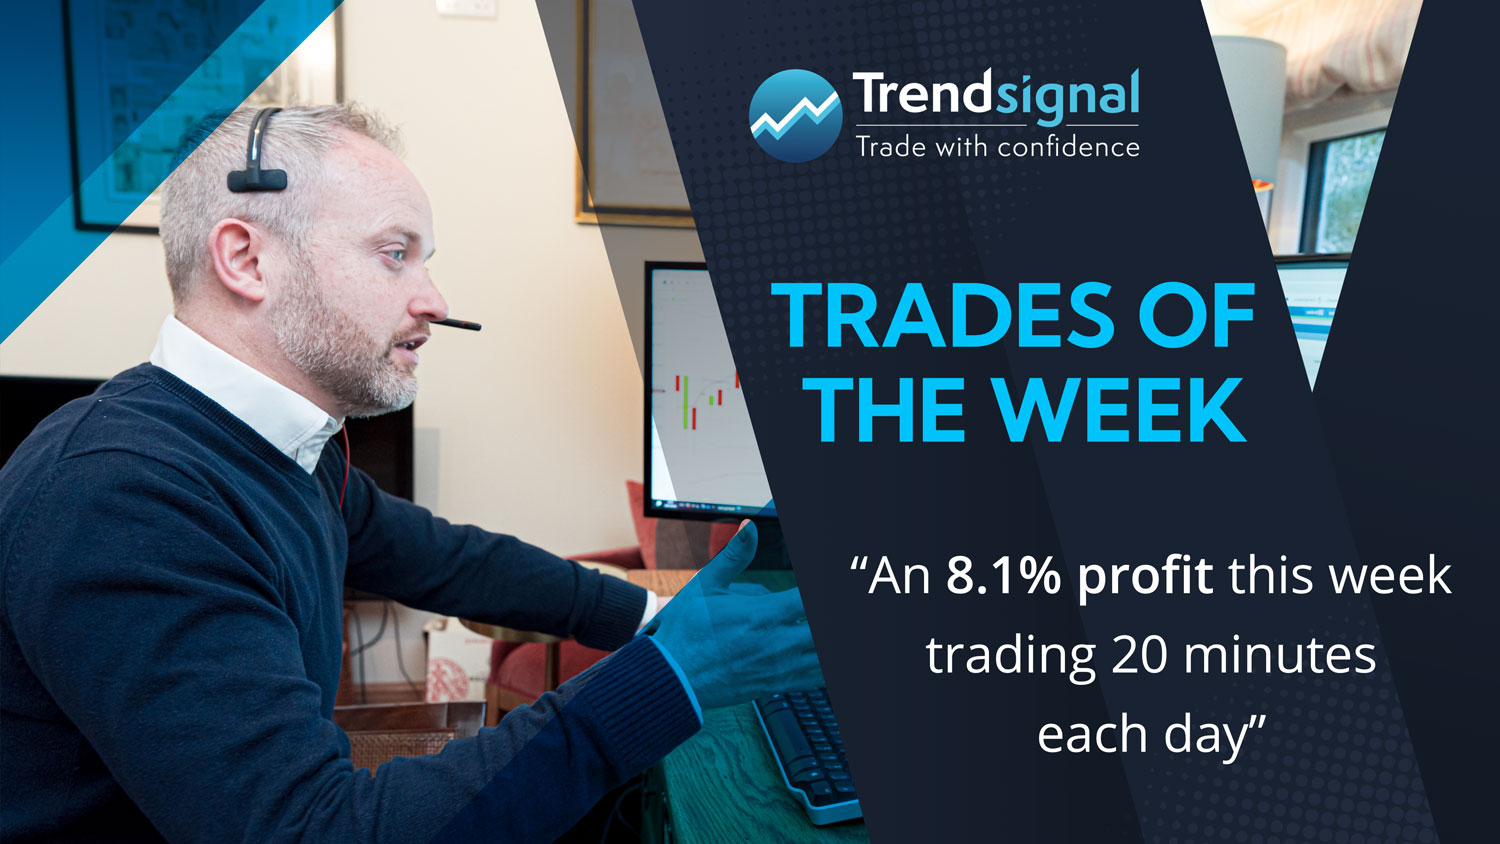 An 8.1% profit this week trading 20 minutes each day